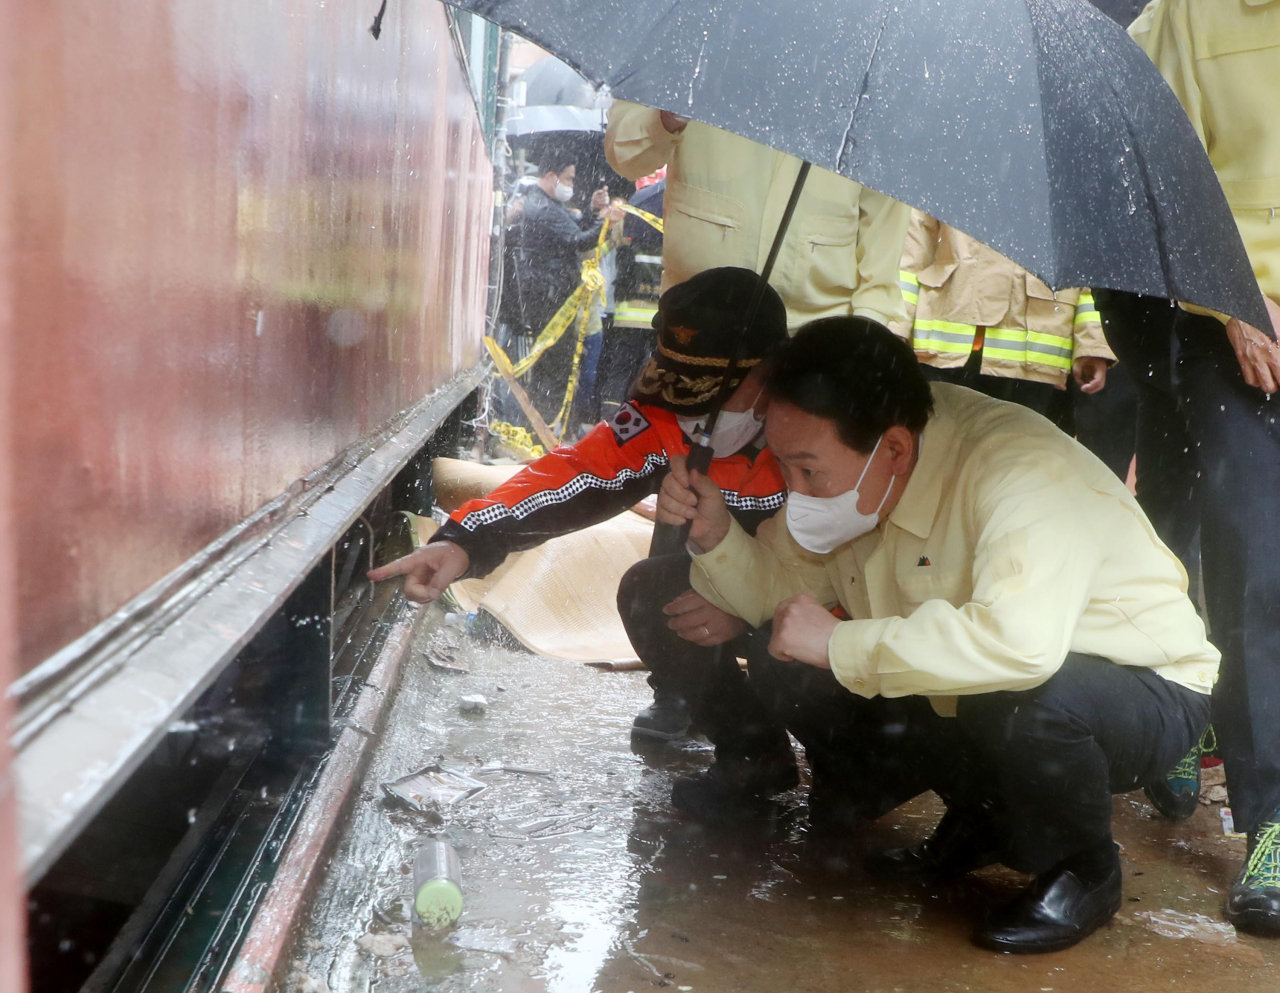 President Yoon Suk-yeol visits a basement home shattered by downpours in Gwanak-gu, southwestern Seoul, on Tuesday. Three people living in the basement were killed in flooding the night before. (Yonhap)